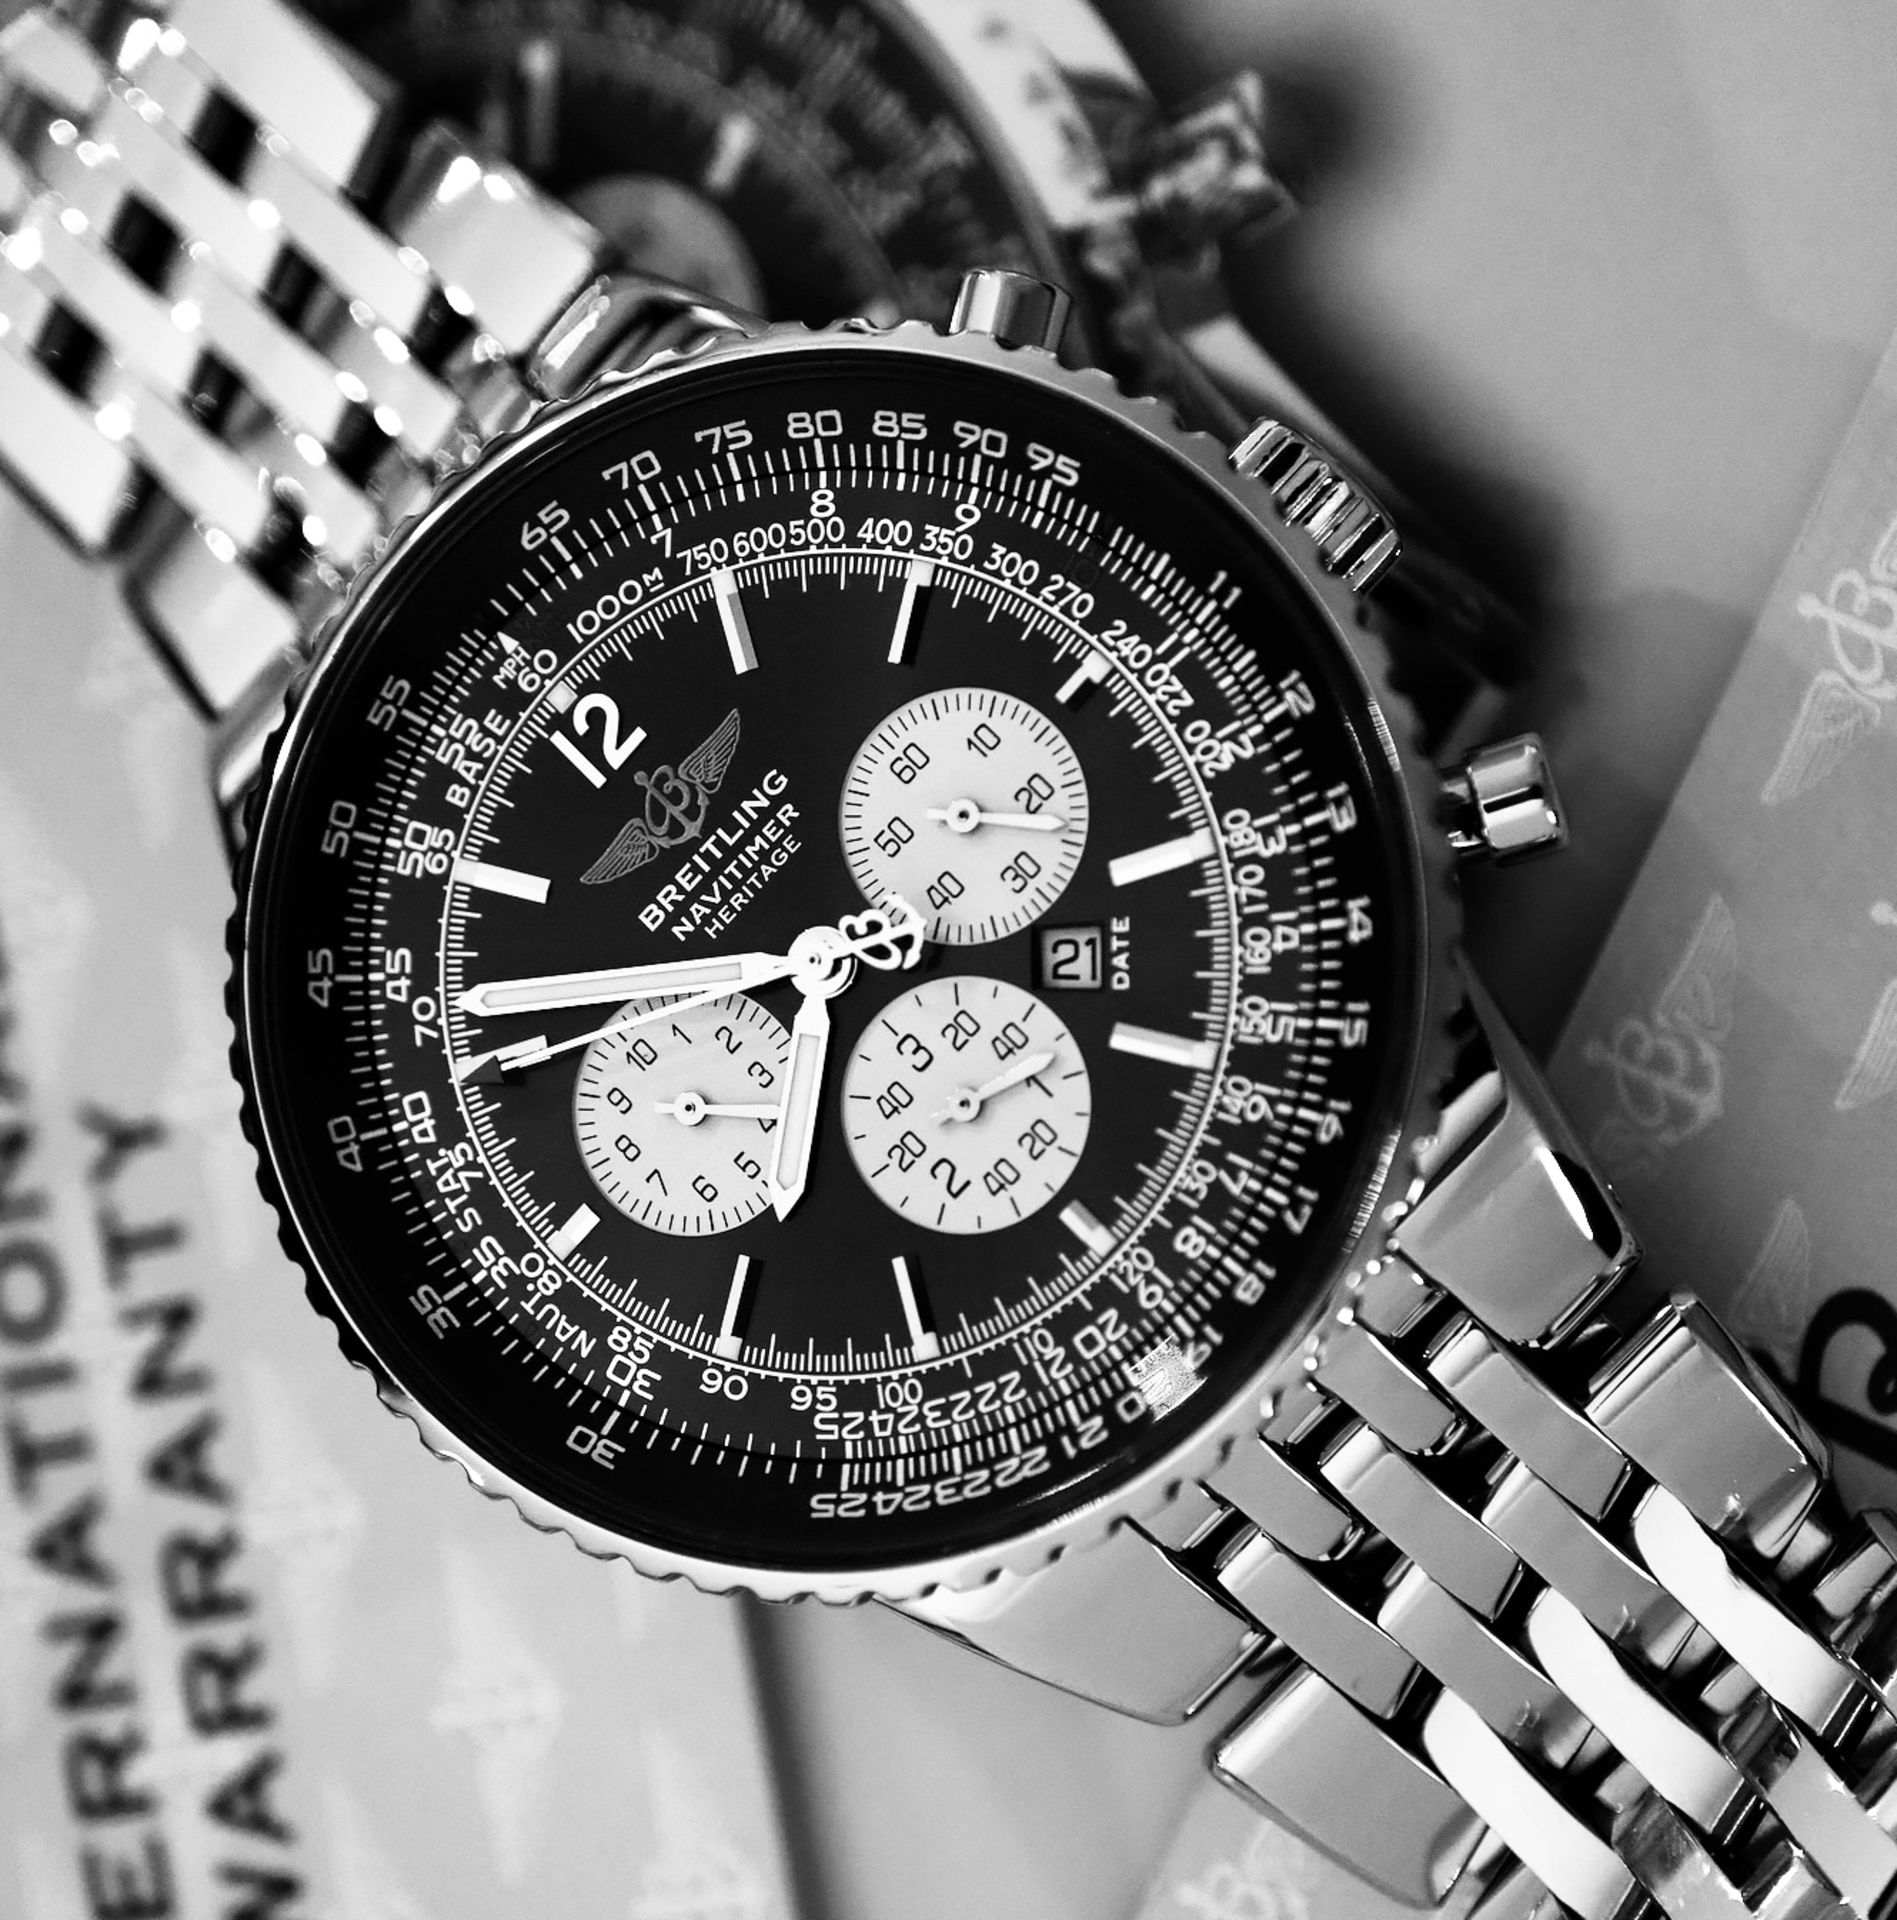 BREITLING NAVITIMER HERITAGE CHRONOGRAPH (REF. A35350) 'FULL SET - BOX, CERTS. ETC.' NAVY DIAL - Image 16 of 16